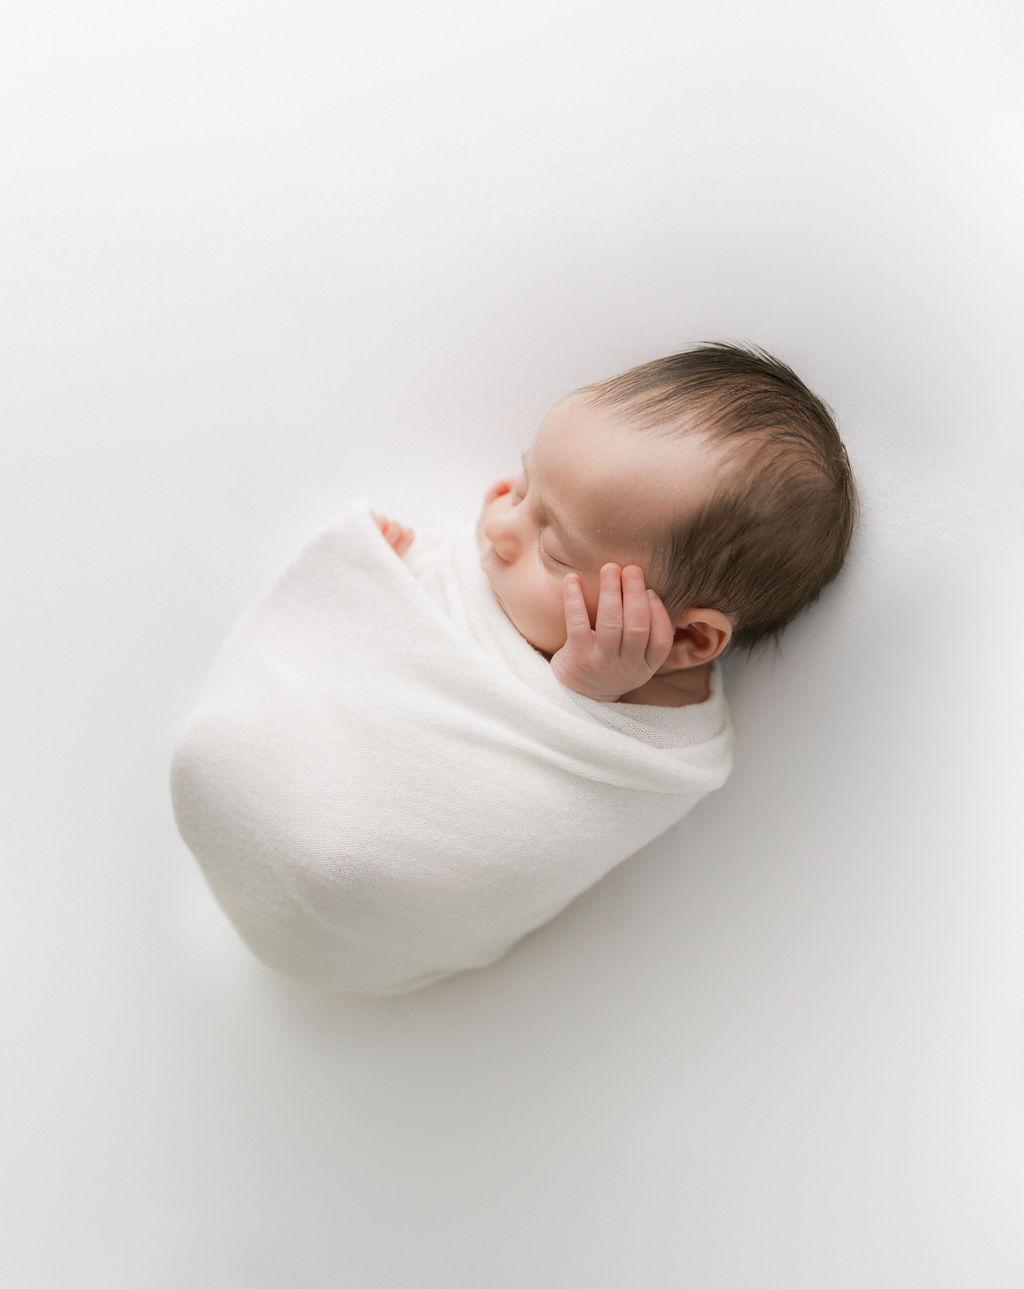 A newborn baby sleeps in a white swaddle with hands sticking out